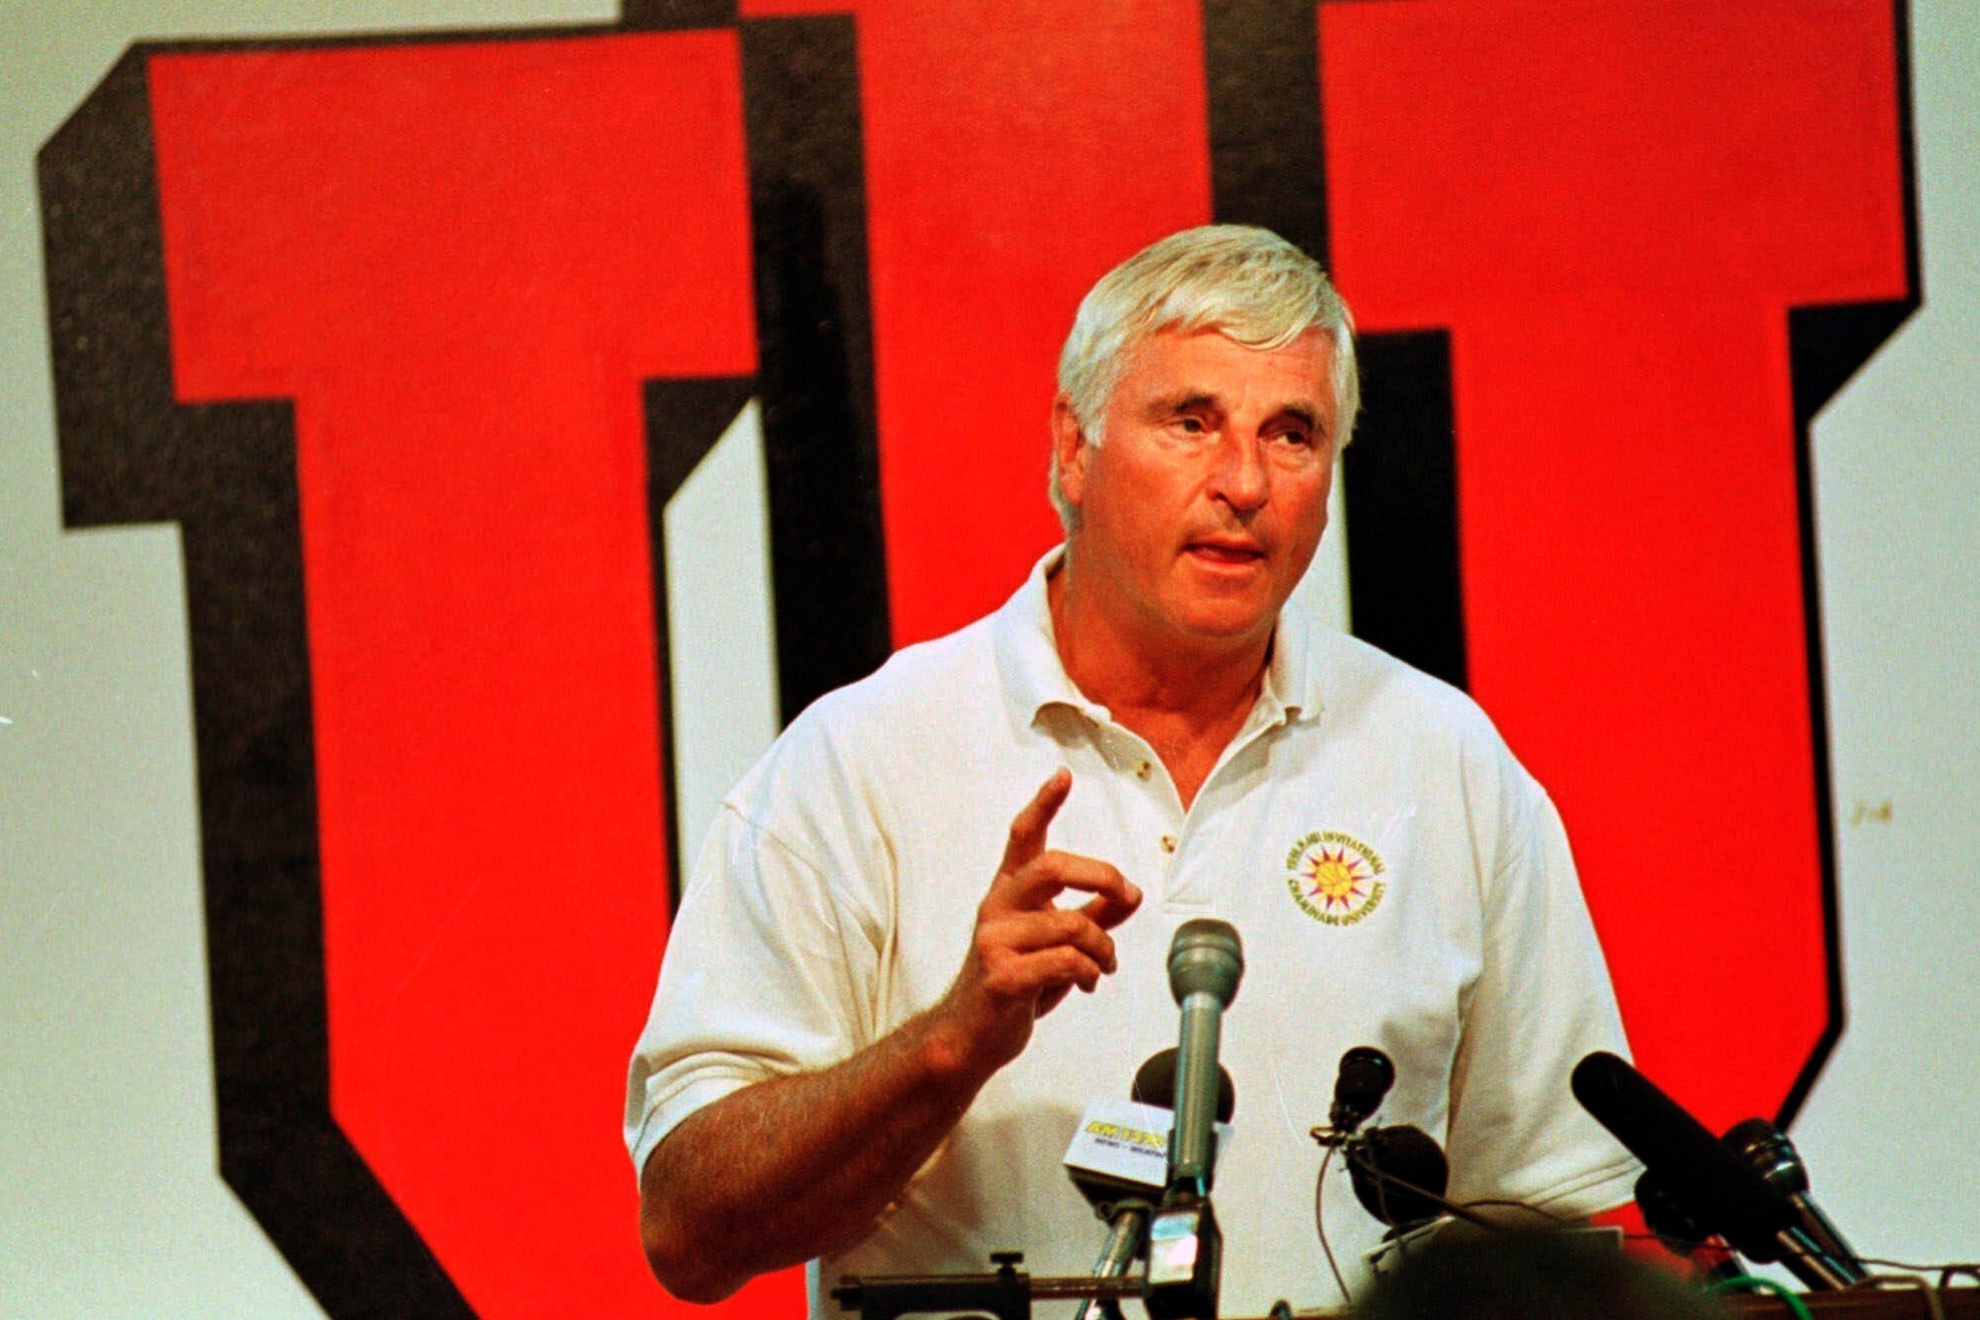 Legendary basketball coach Bobby Knight, during a press conference in 1999.